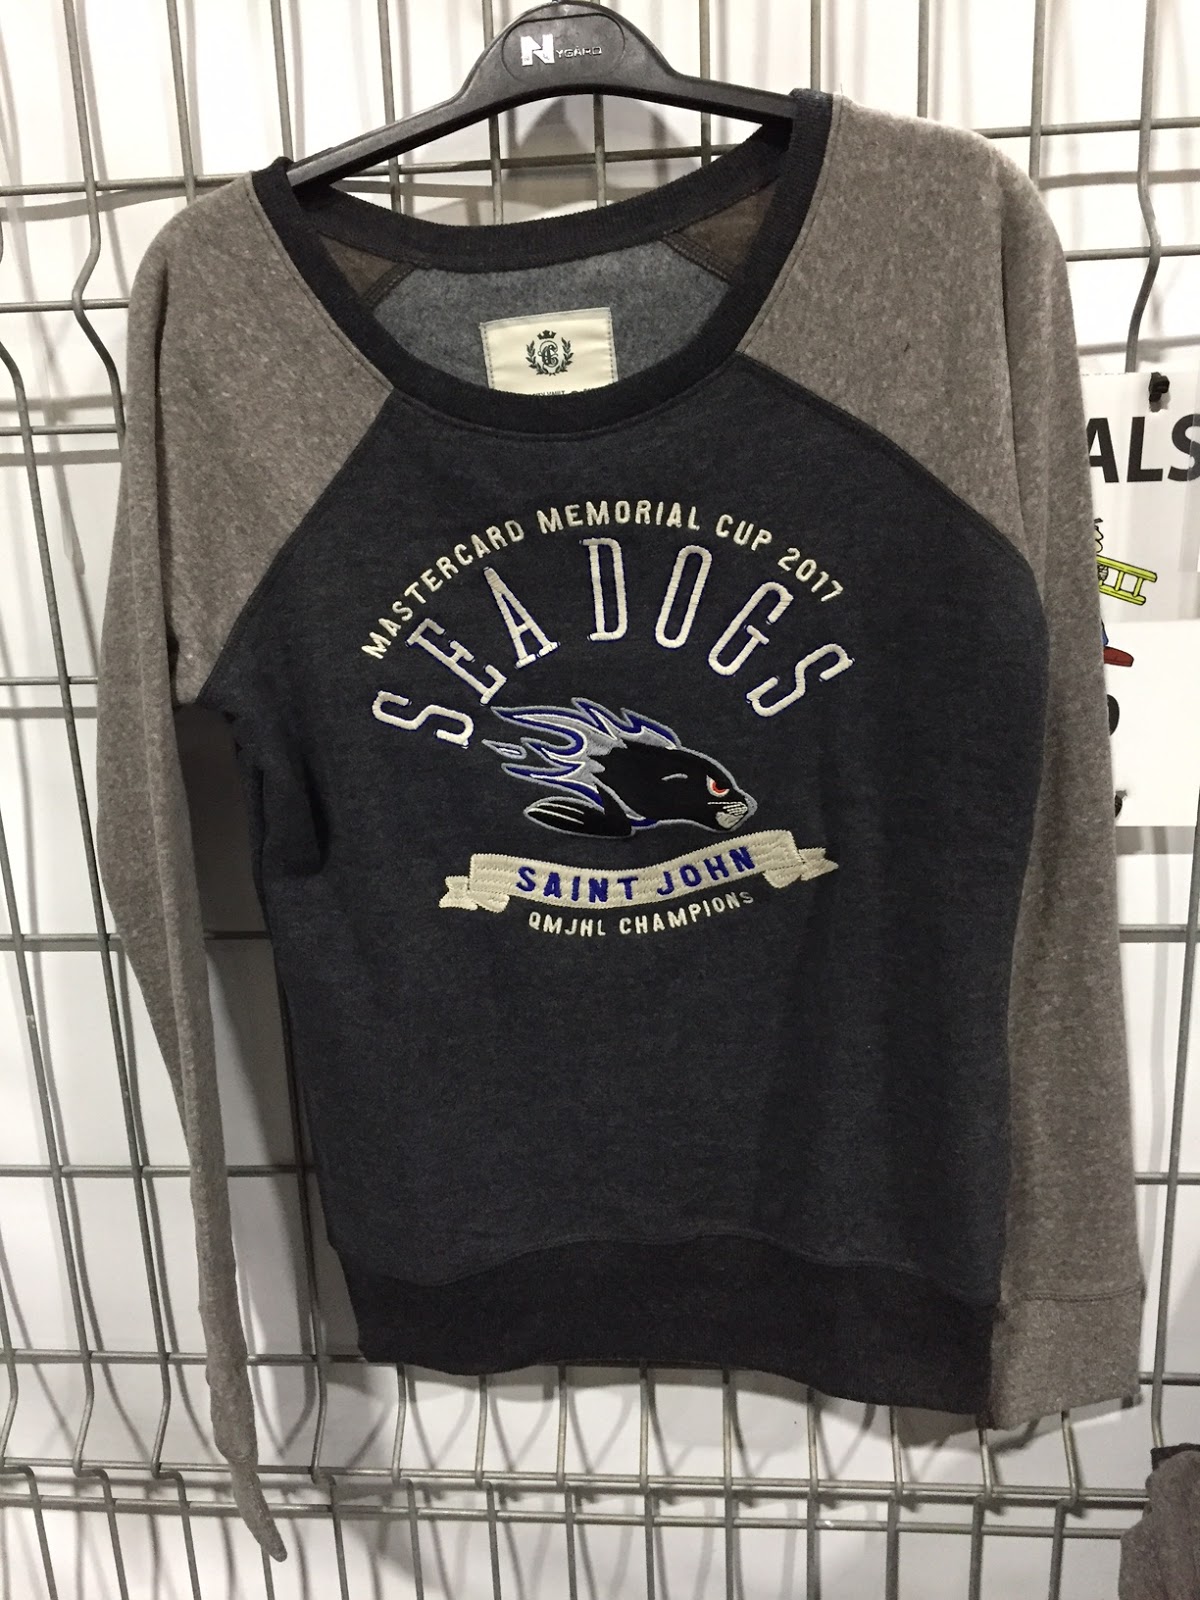 Station Nation: Misspelled Saint John merchandise replaced at Memorial Cup